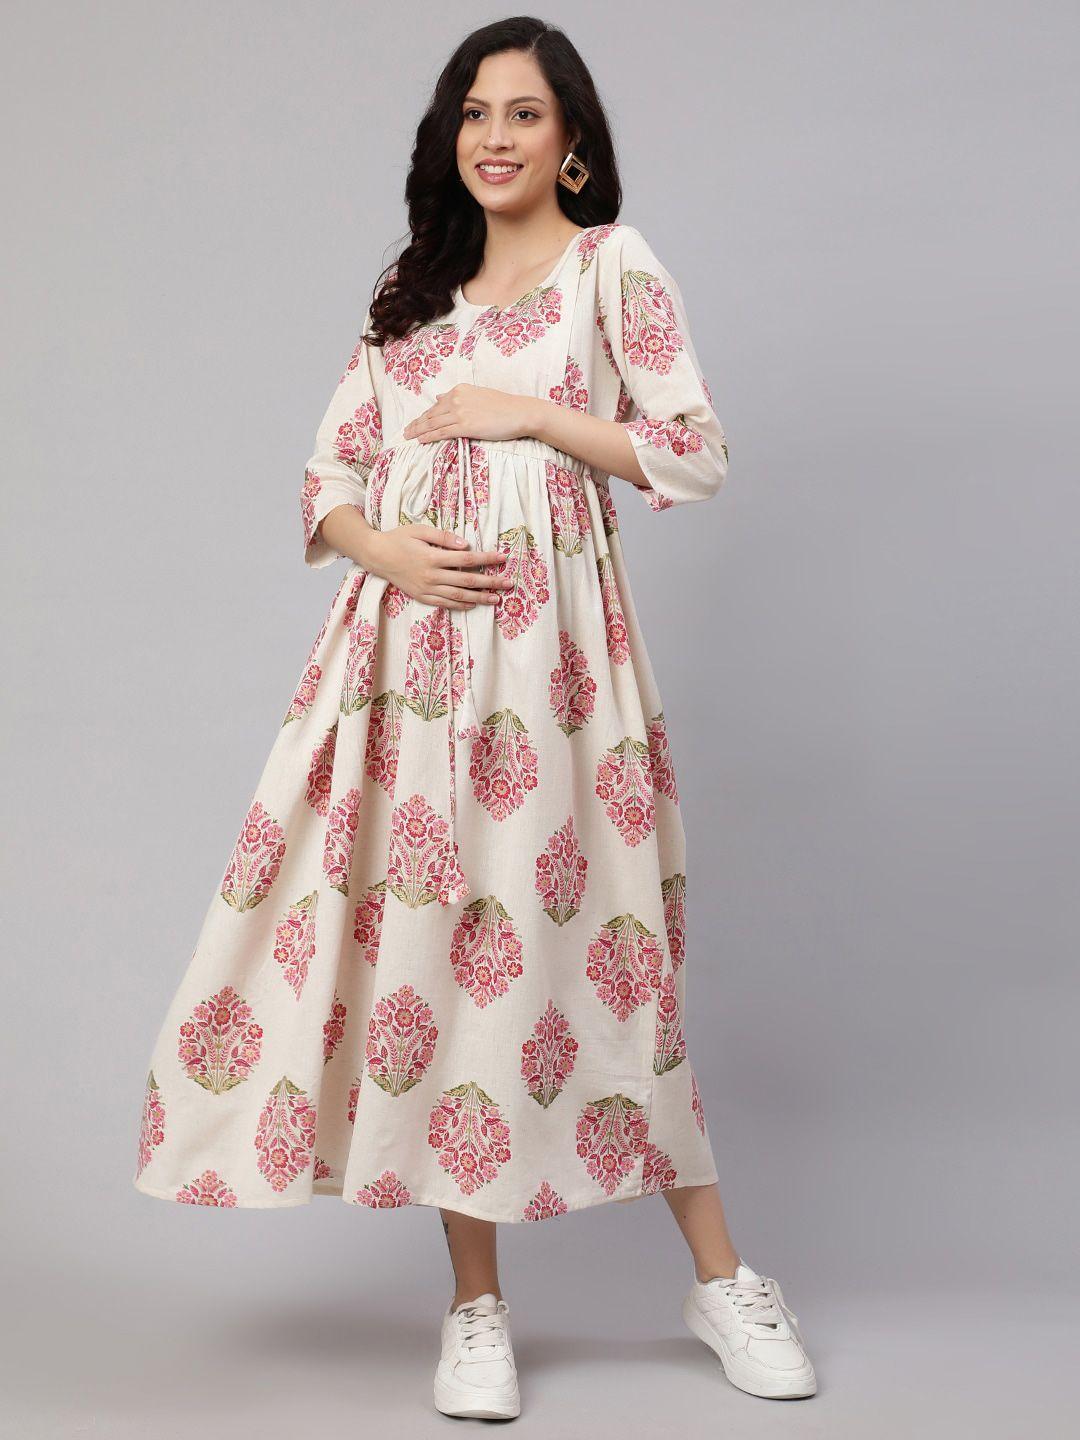 nayo off white floral printed round neck tie up cotton fit & flare maternity dress